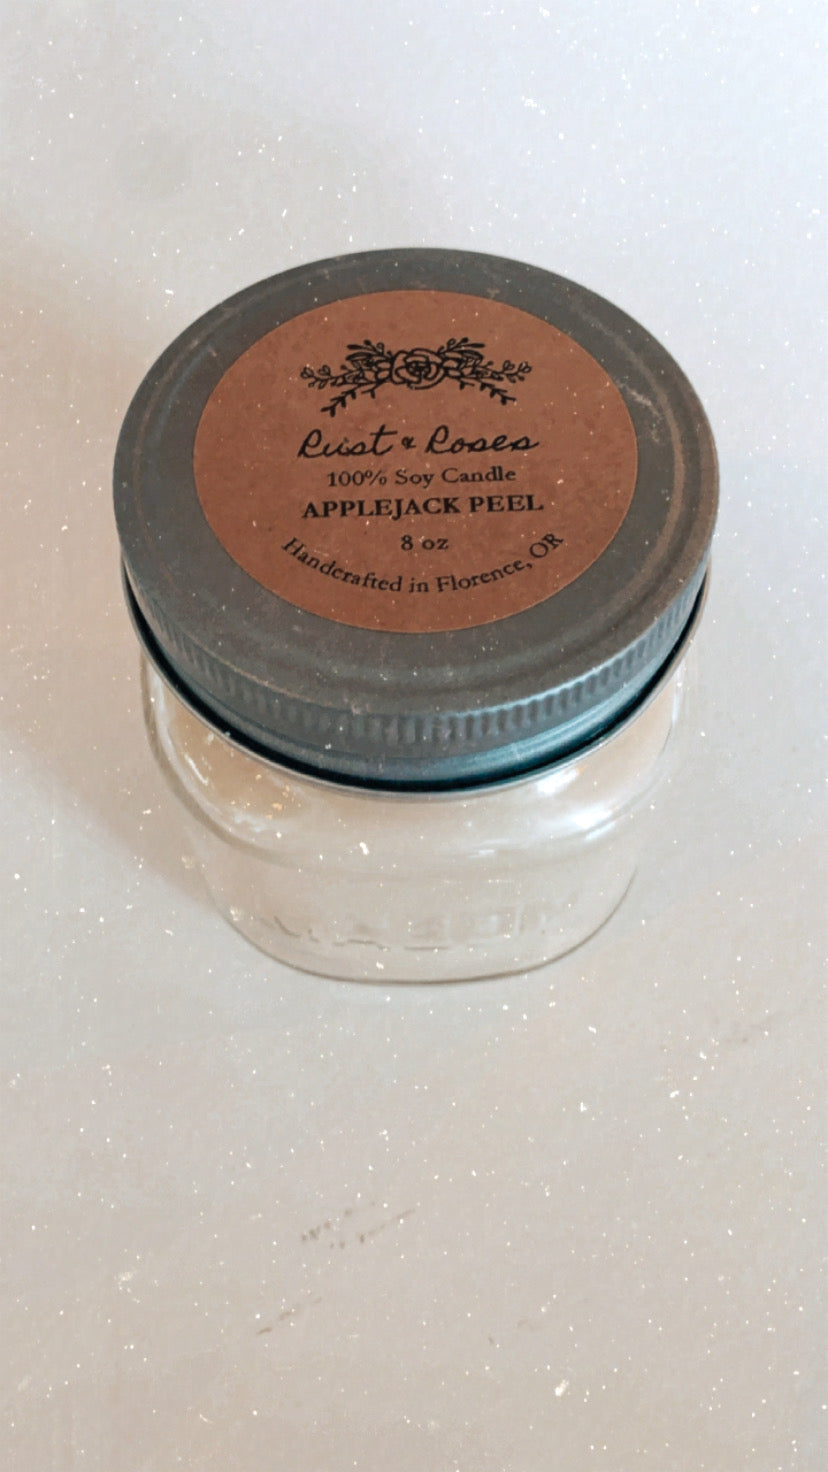 Rust & Roses Soy Candle